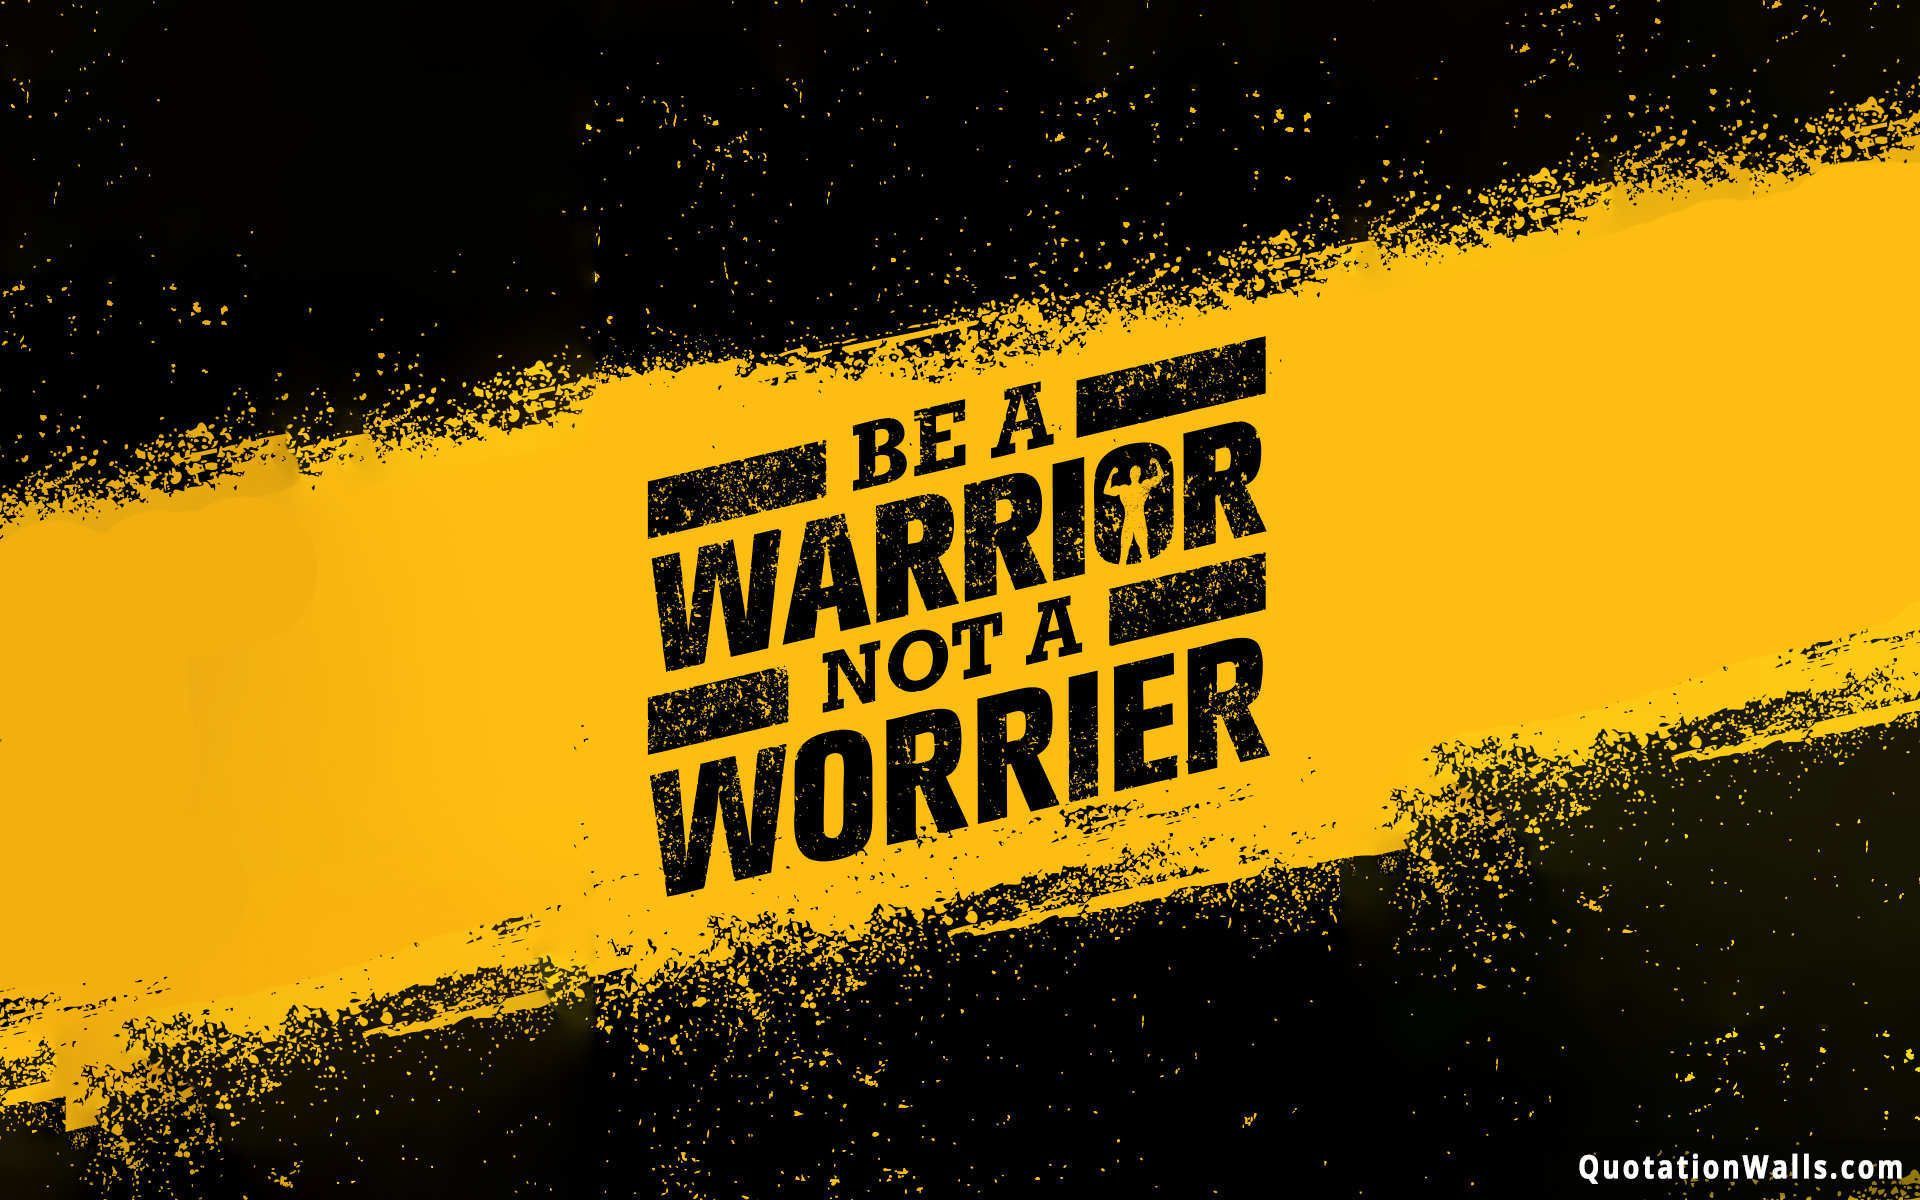 Res: 1920x Be A Warrior Wallpaper For Desktop. Fitness motivation wallpaper, Inspirational quotes with image, Image quotes